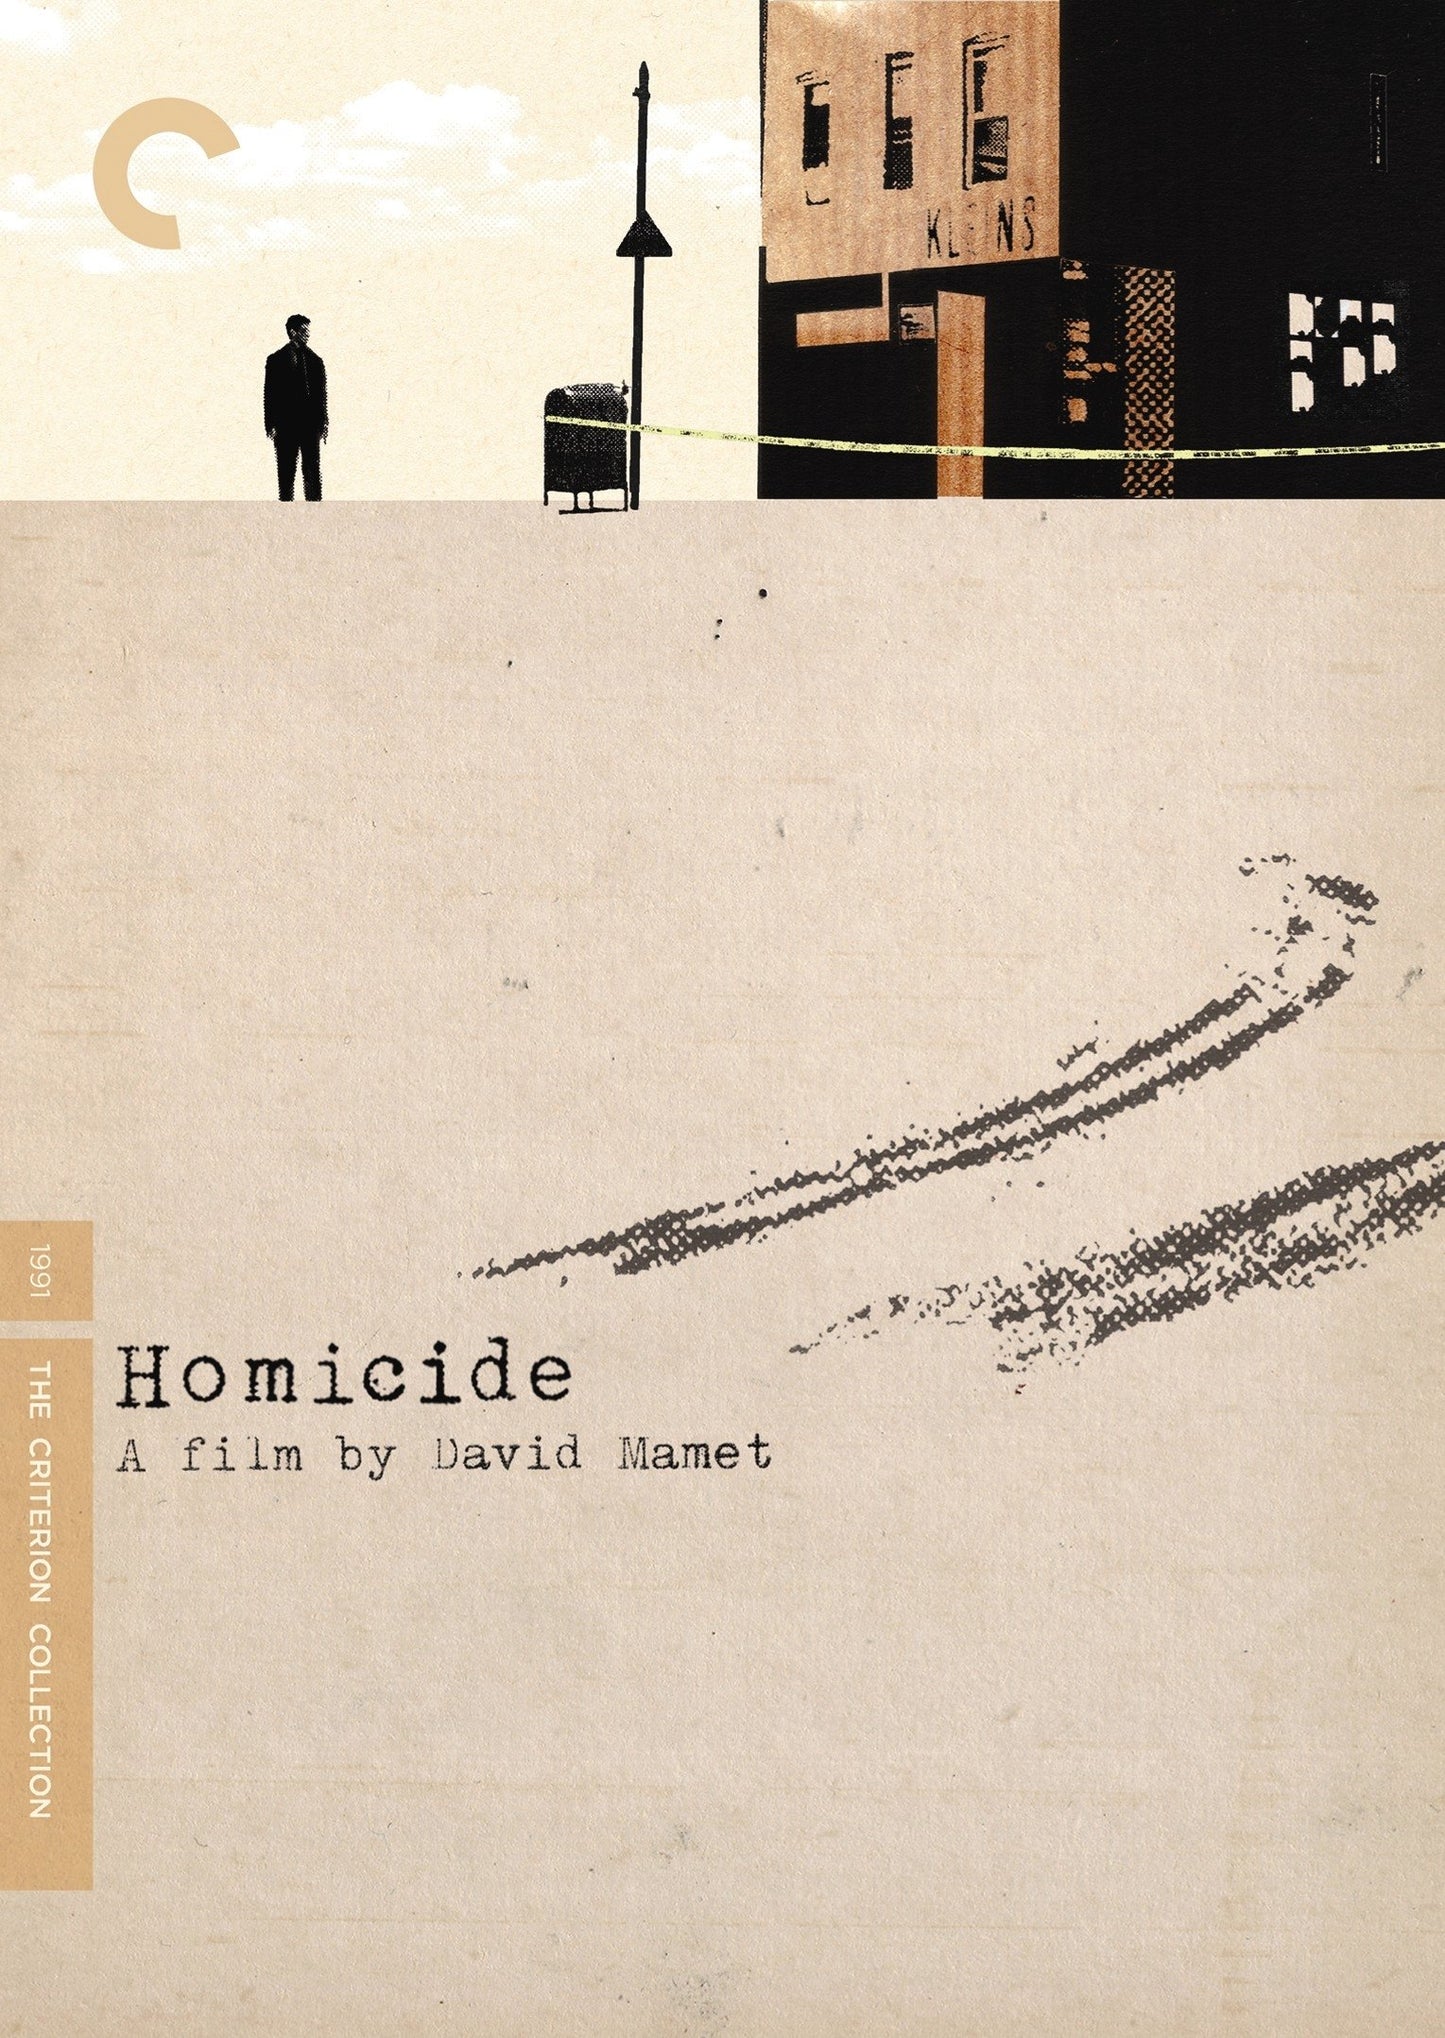 Homicide (The Criterion Collection) [DVD]